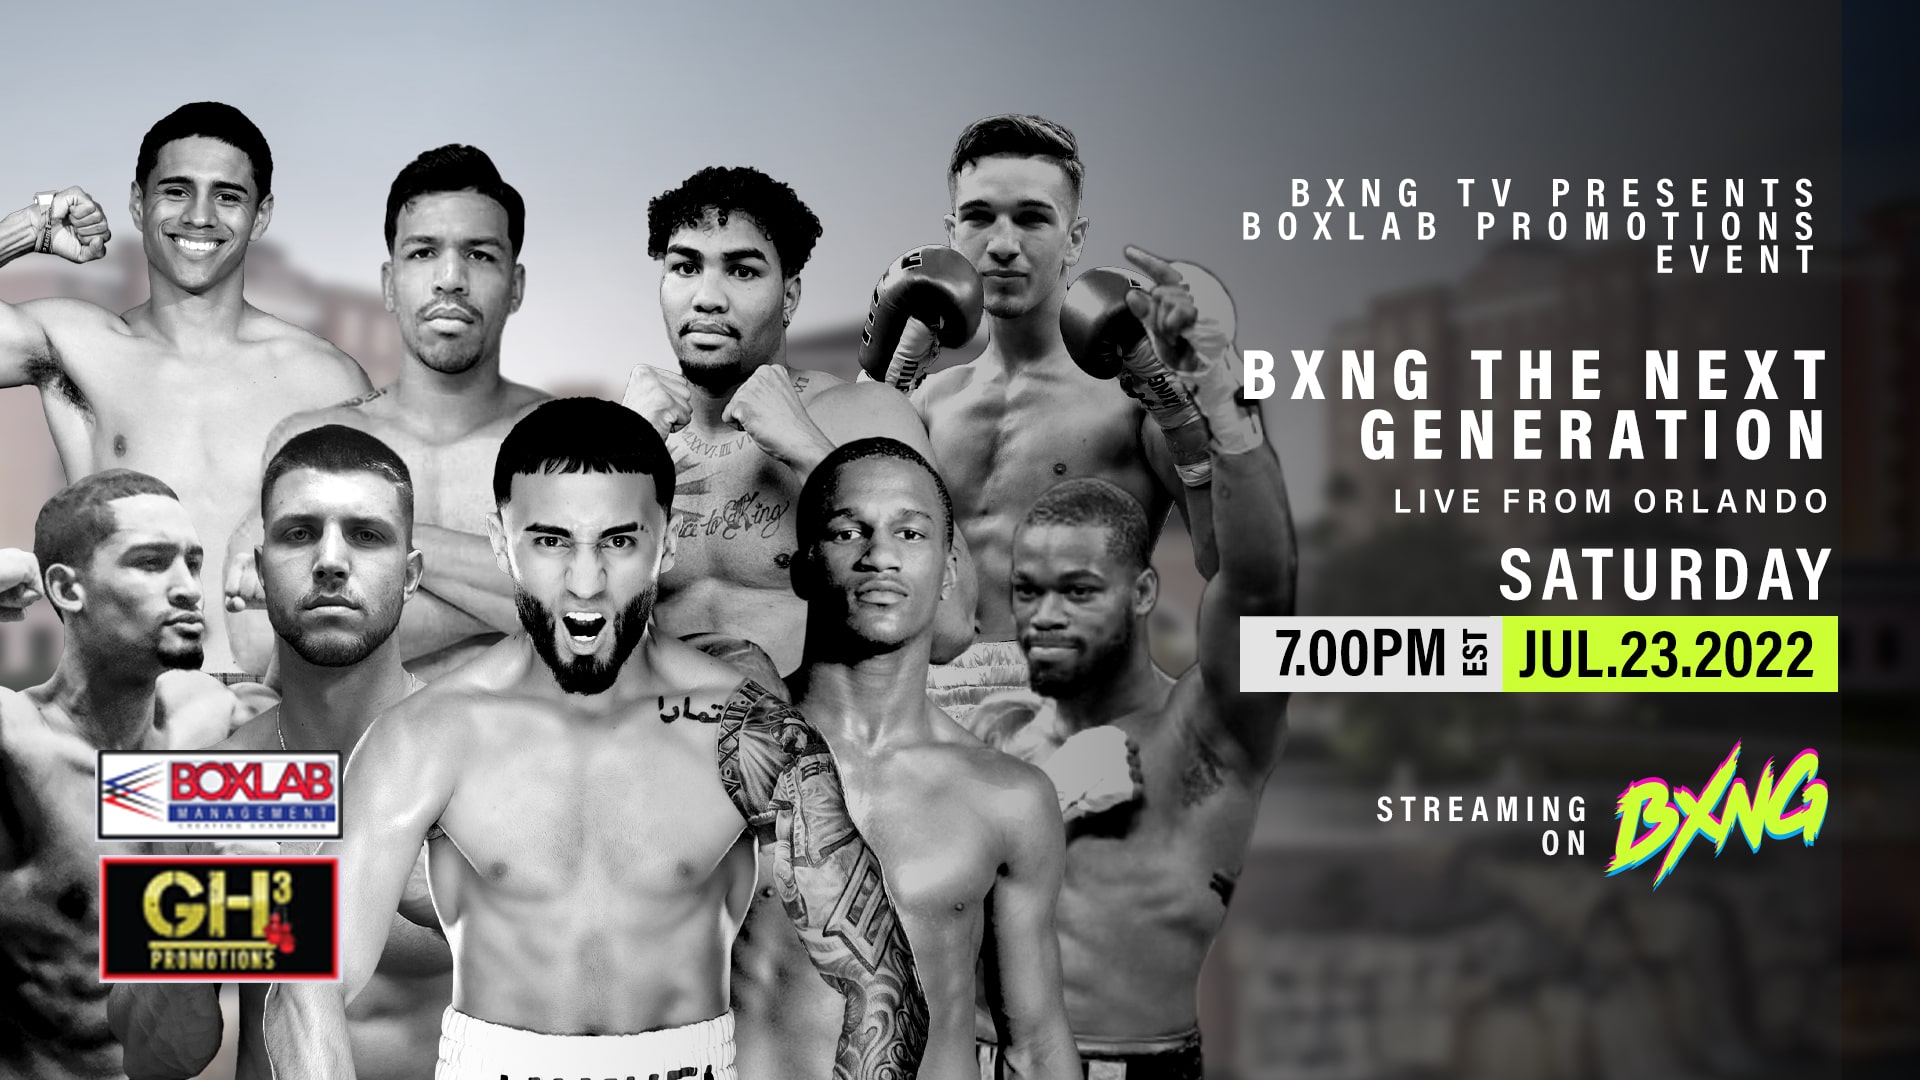 BXNG TV Presents Boxlab Promotions Event Live Stream 07/23/22